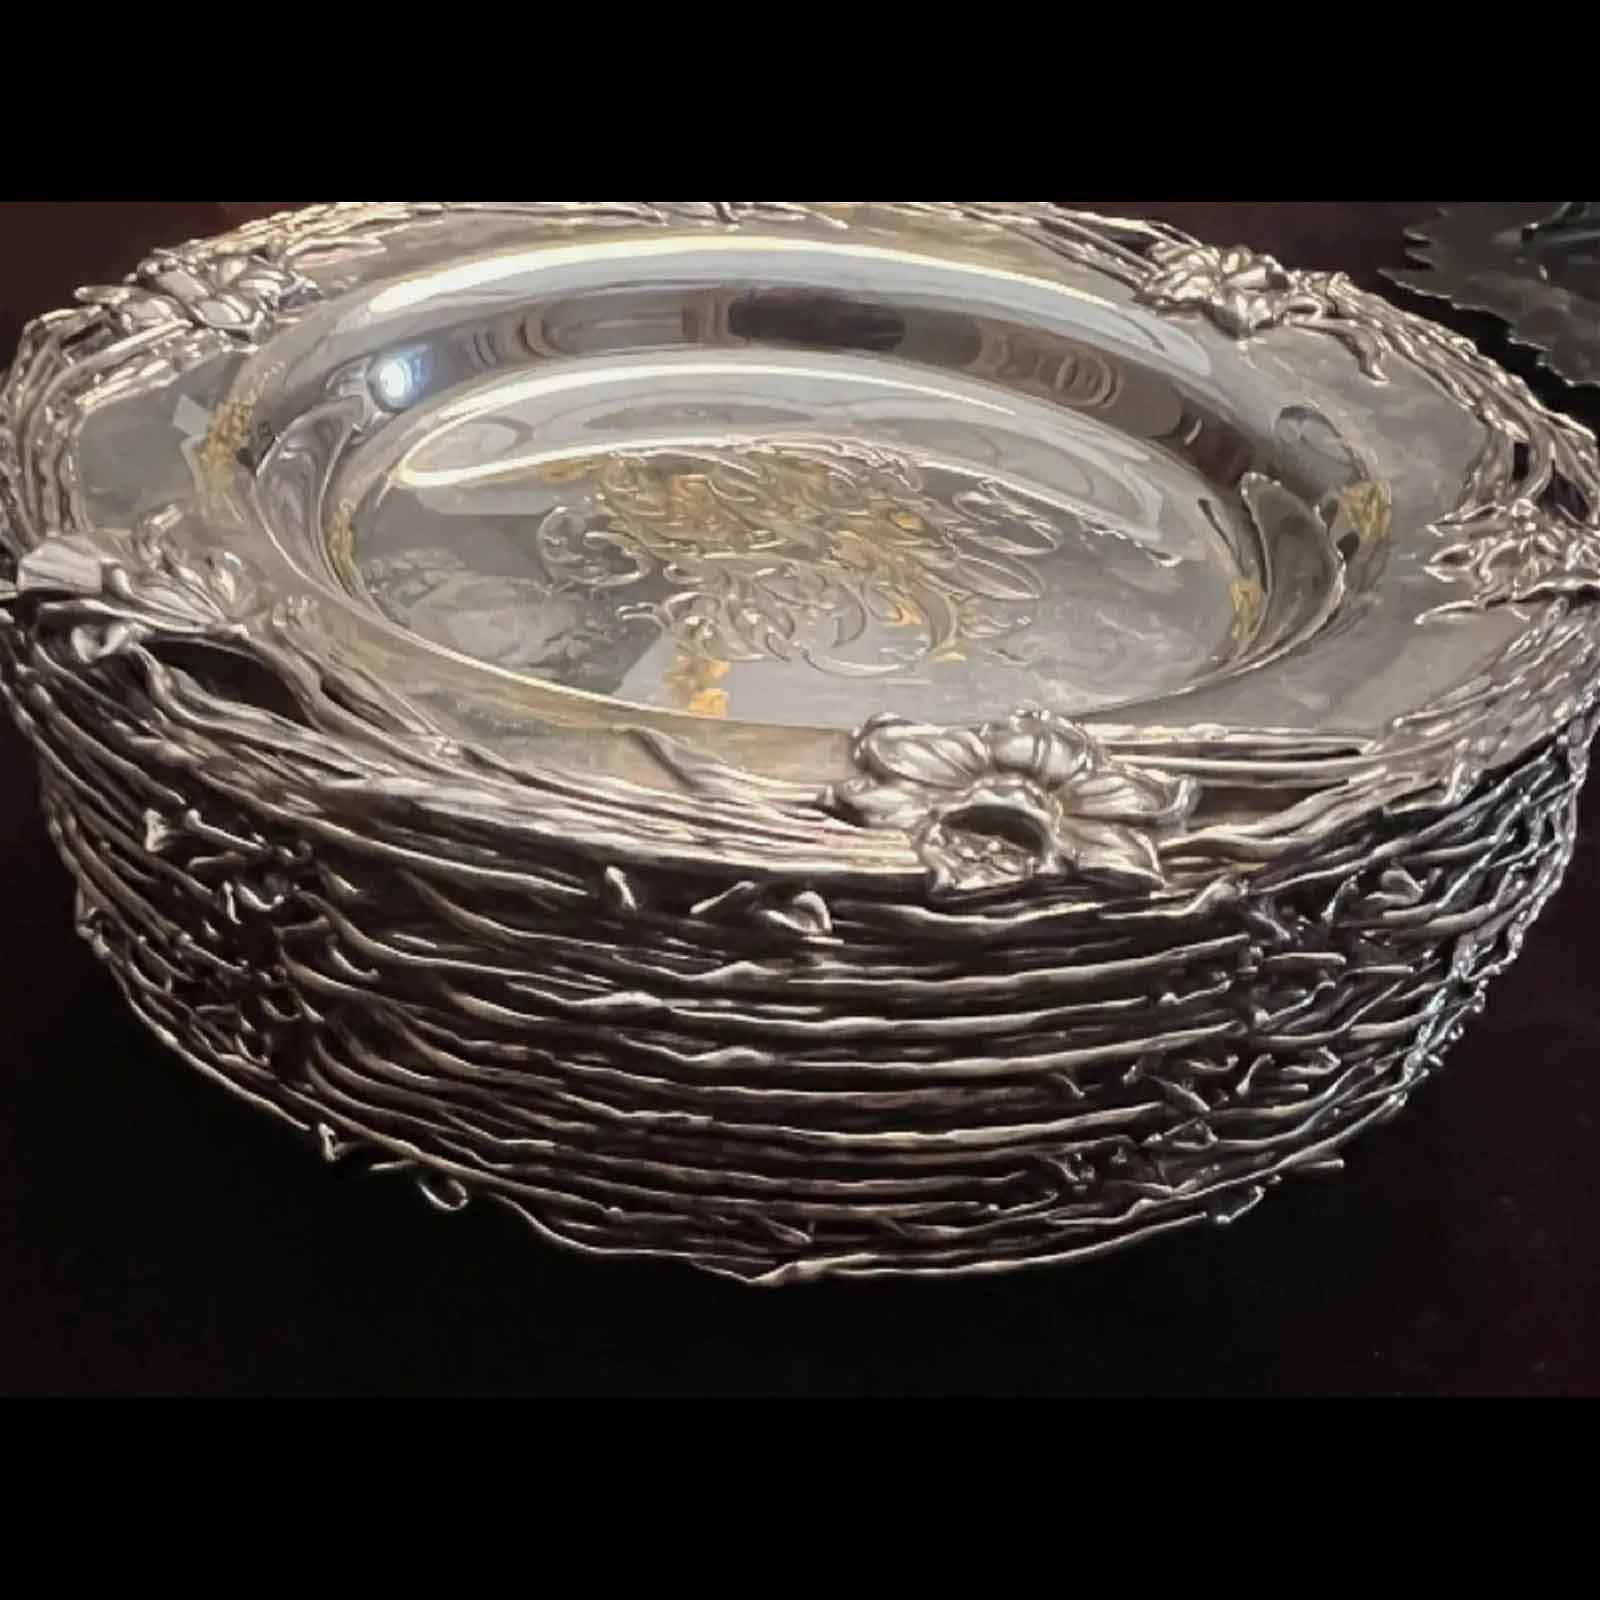 Lebolt Sterling Silver Bread And Butter Set of 12 Plates, estimated at $1,500-$2,000 at SJ Auctioneers.